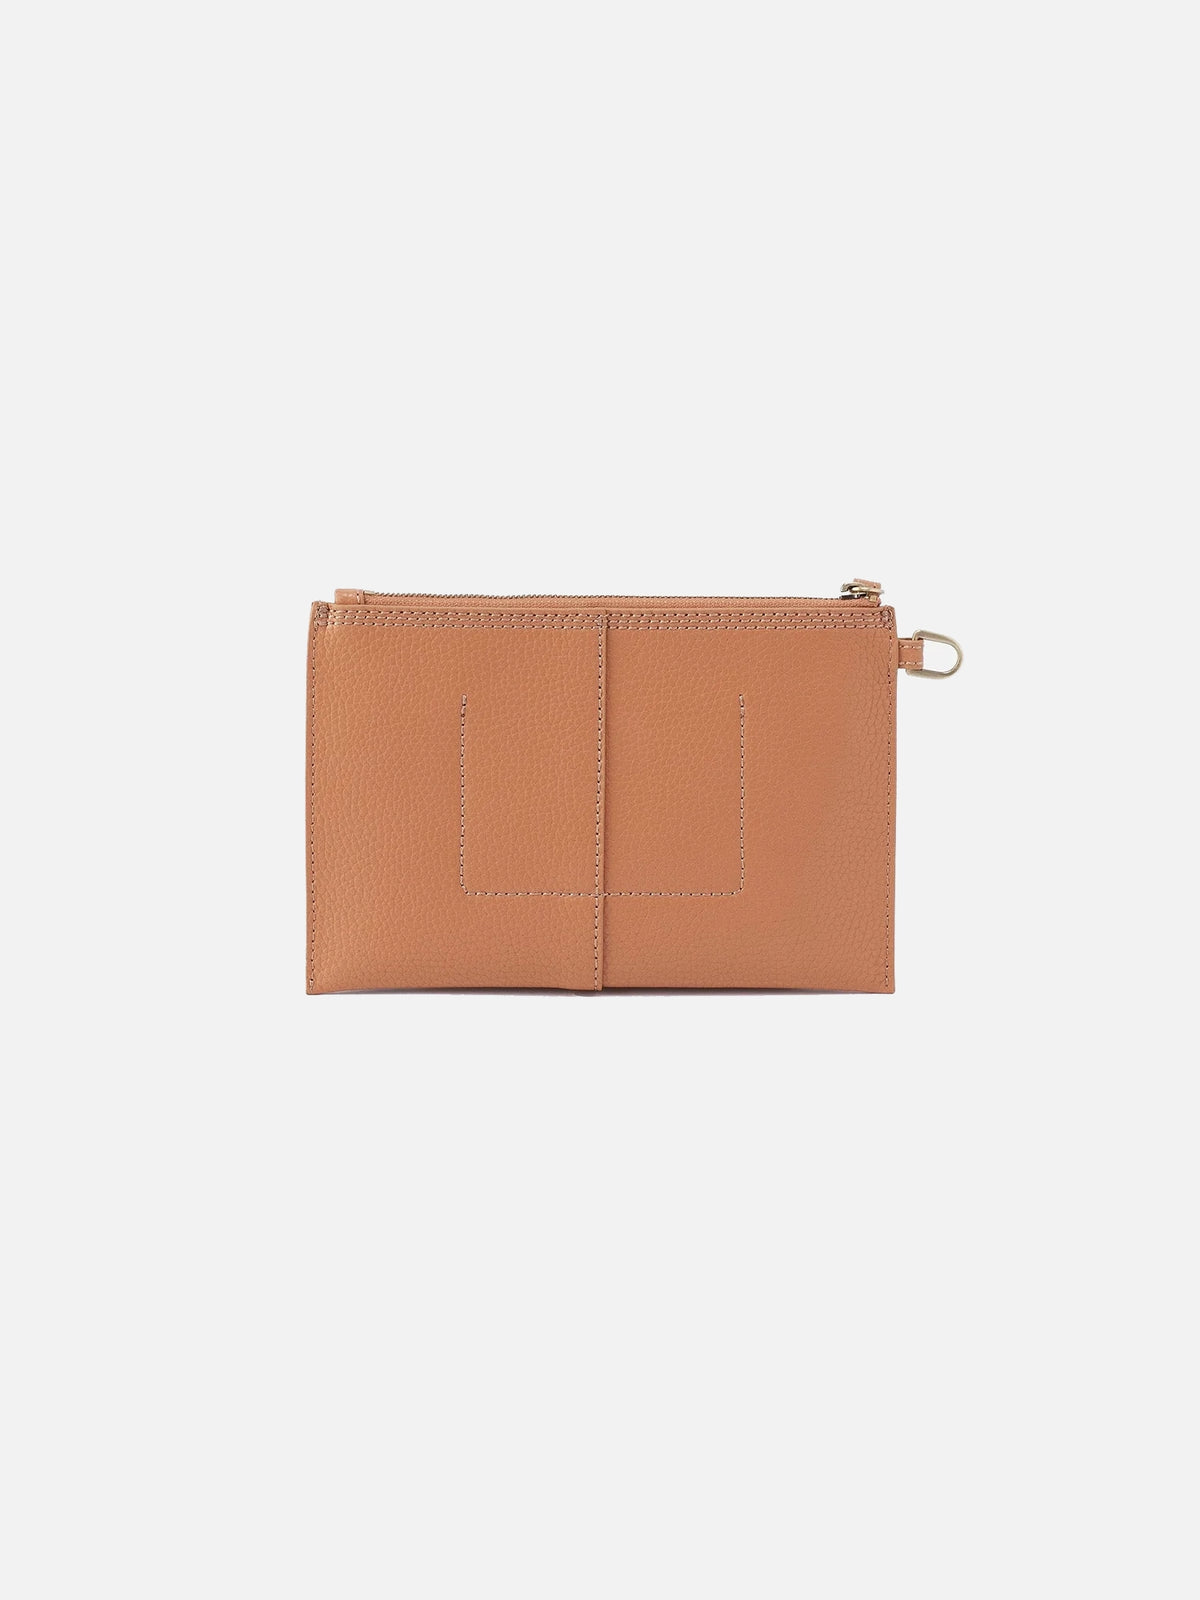 hobo vida small pouch in biscuit micro pebbled leather